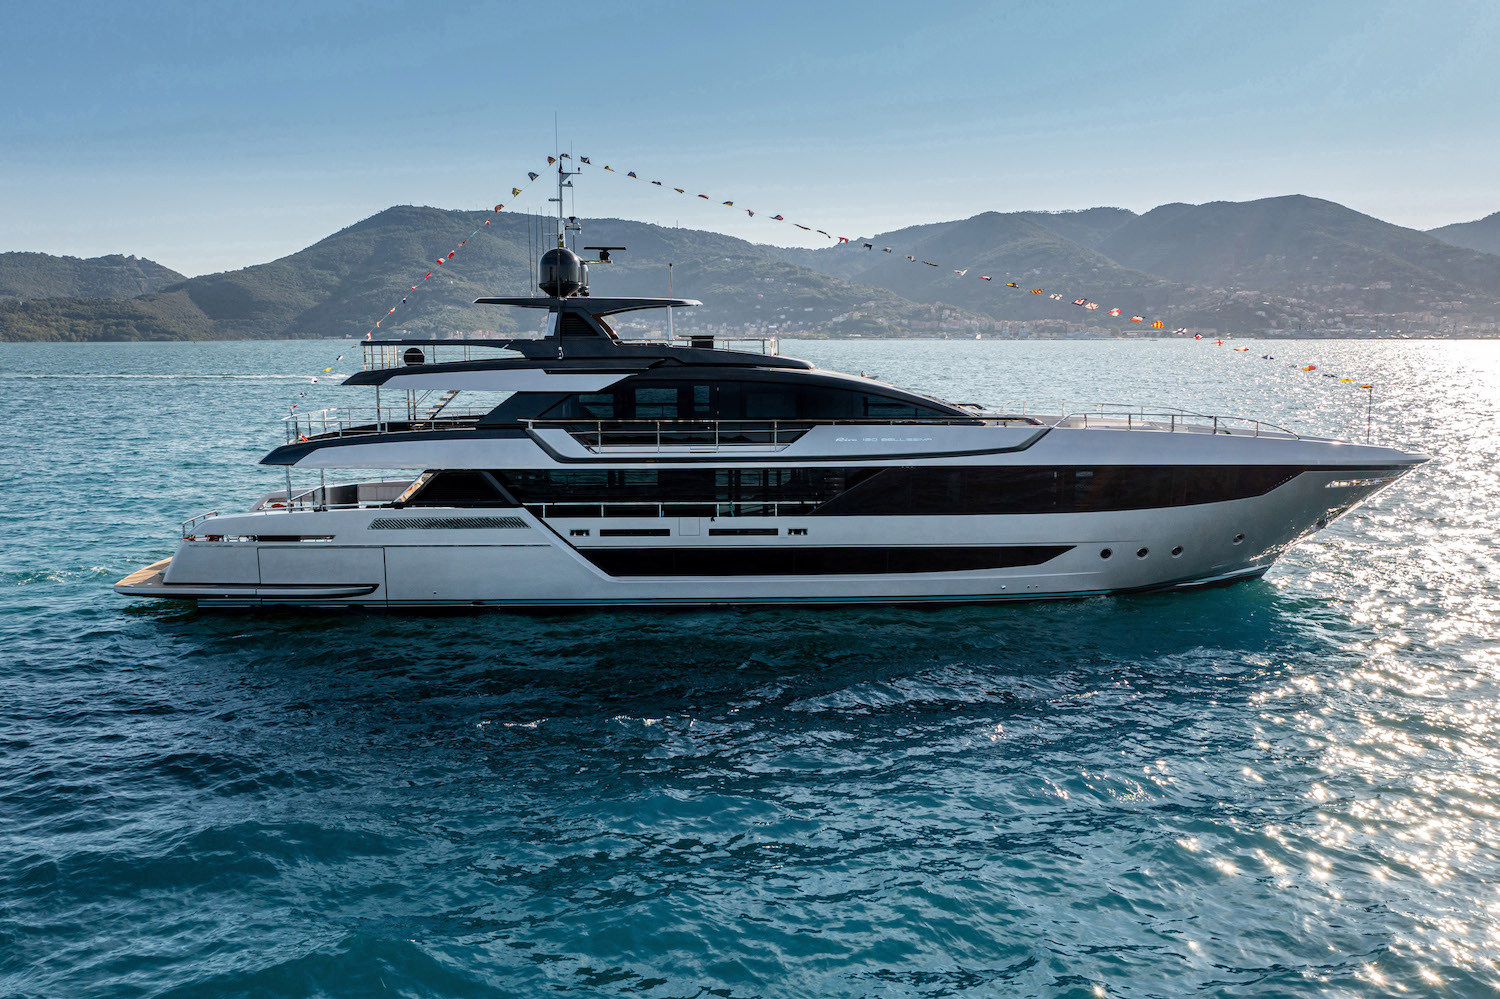 Riva 130' motor yacht Bellissima launched